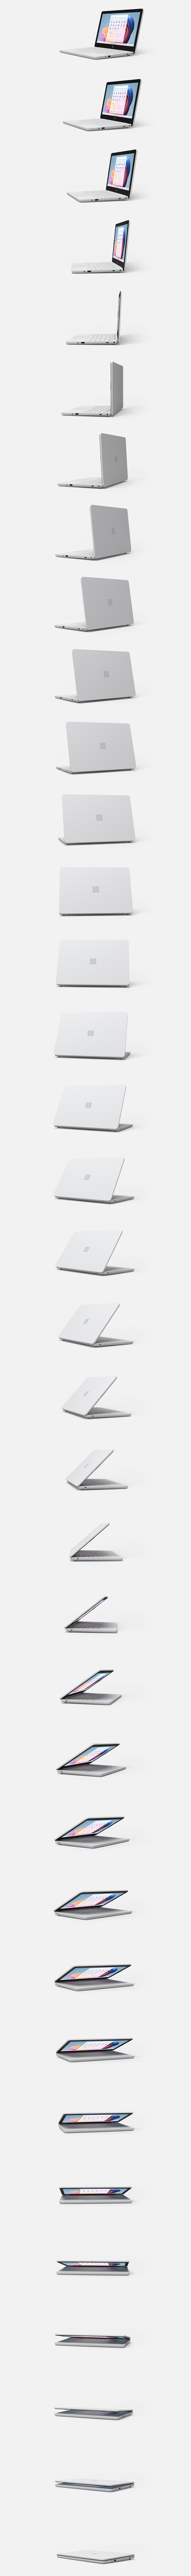 Slide to rotate and explore features of Surface Laptop SE.